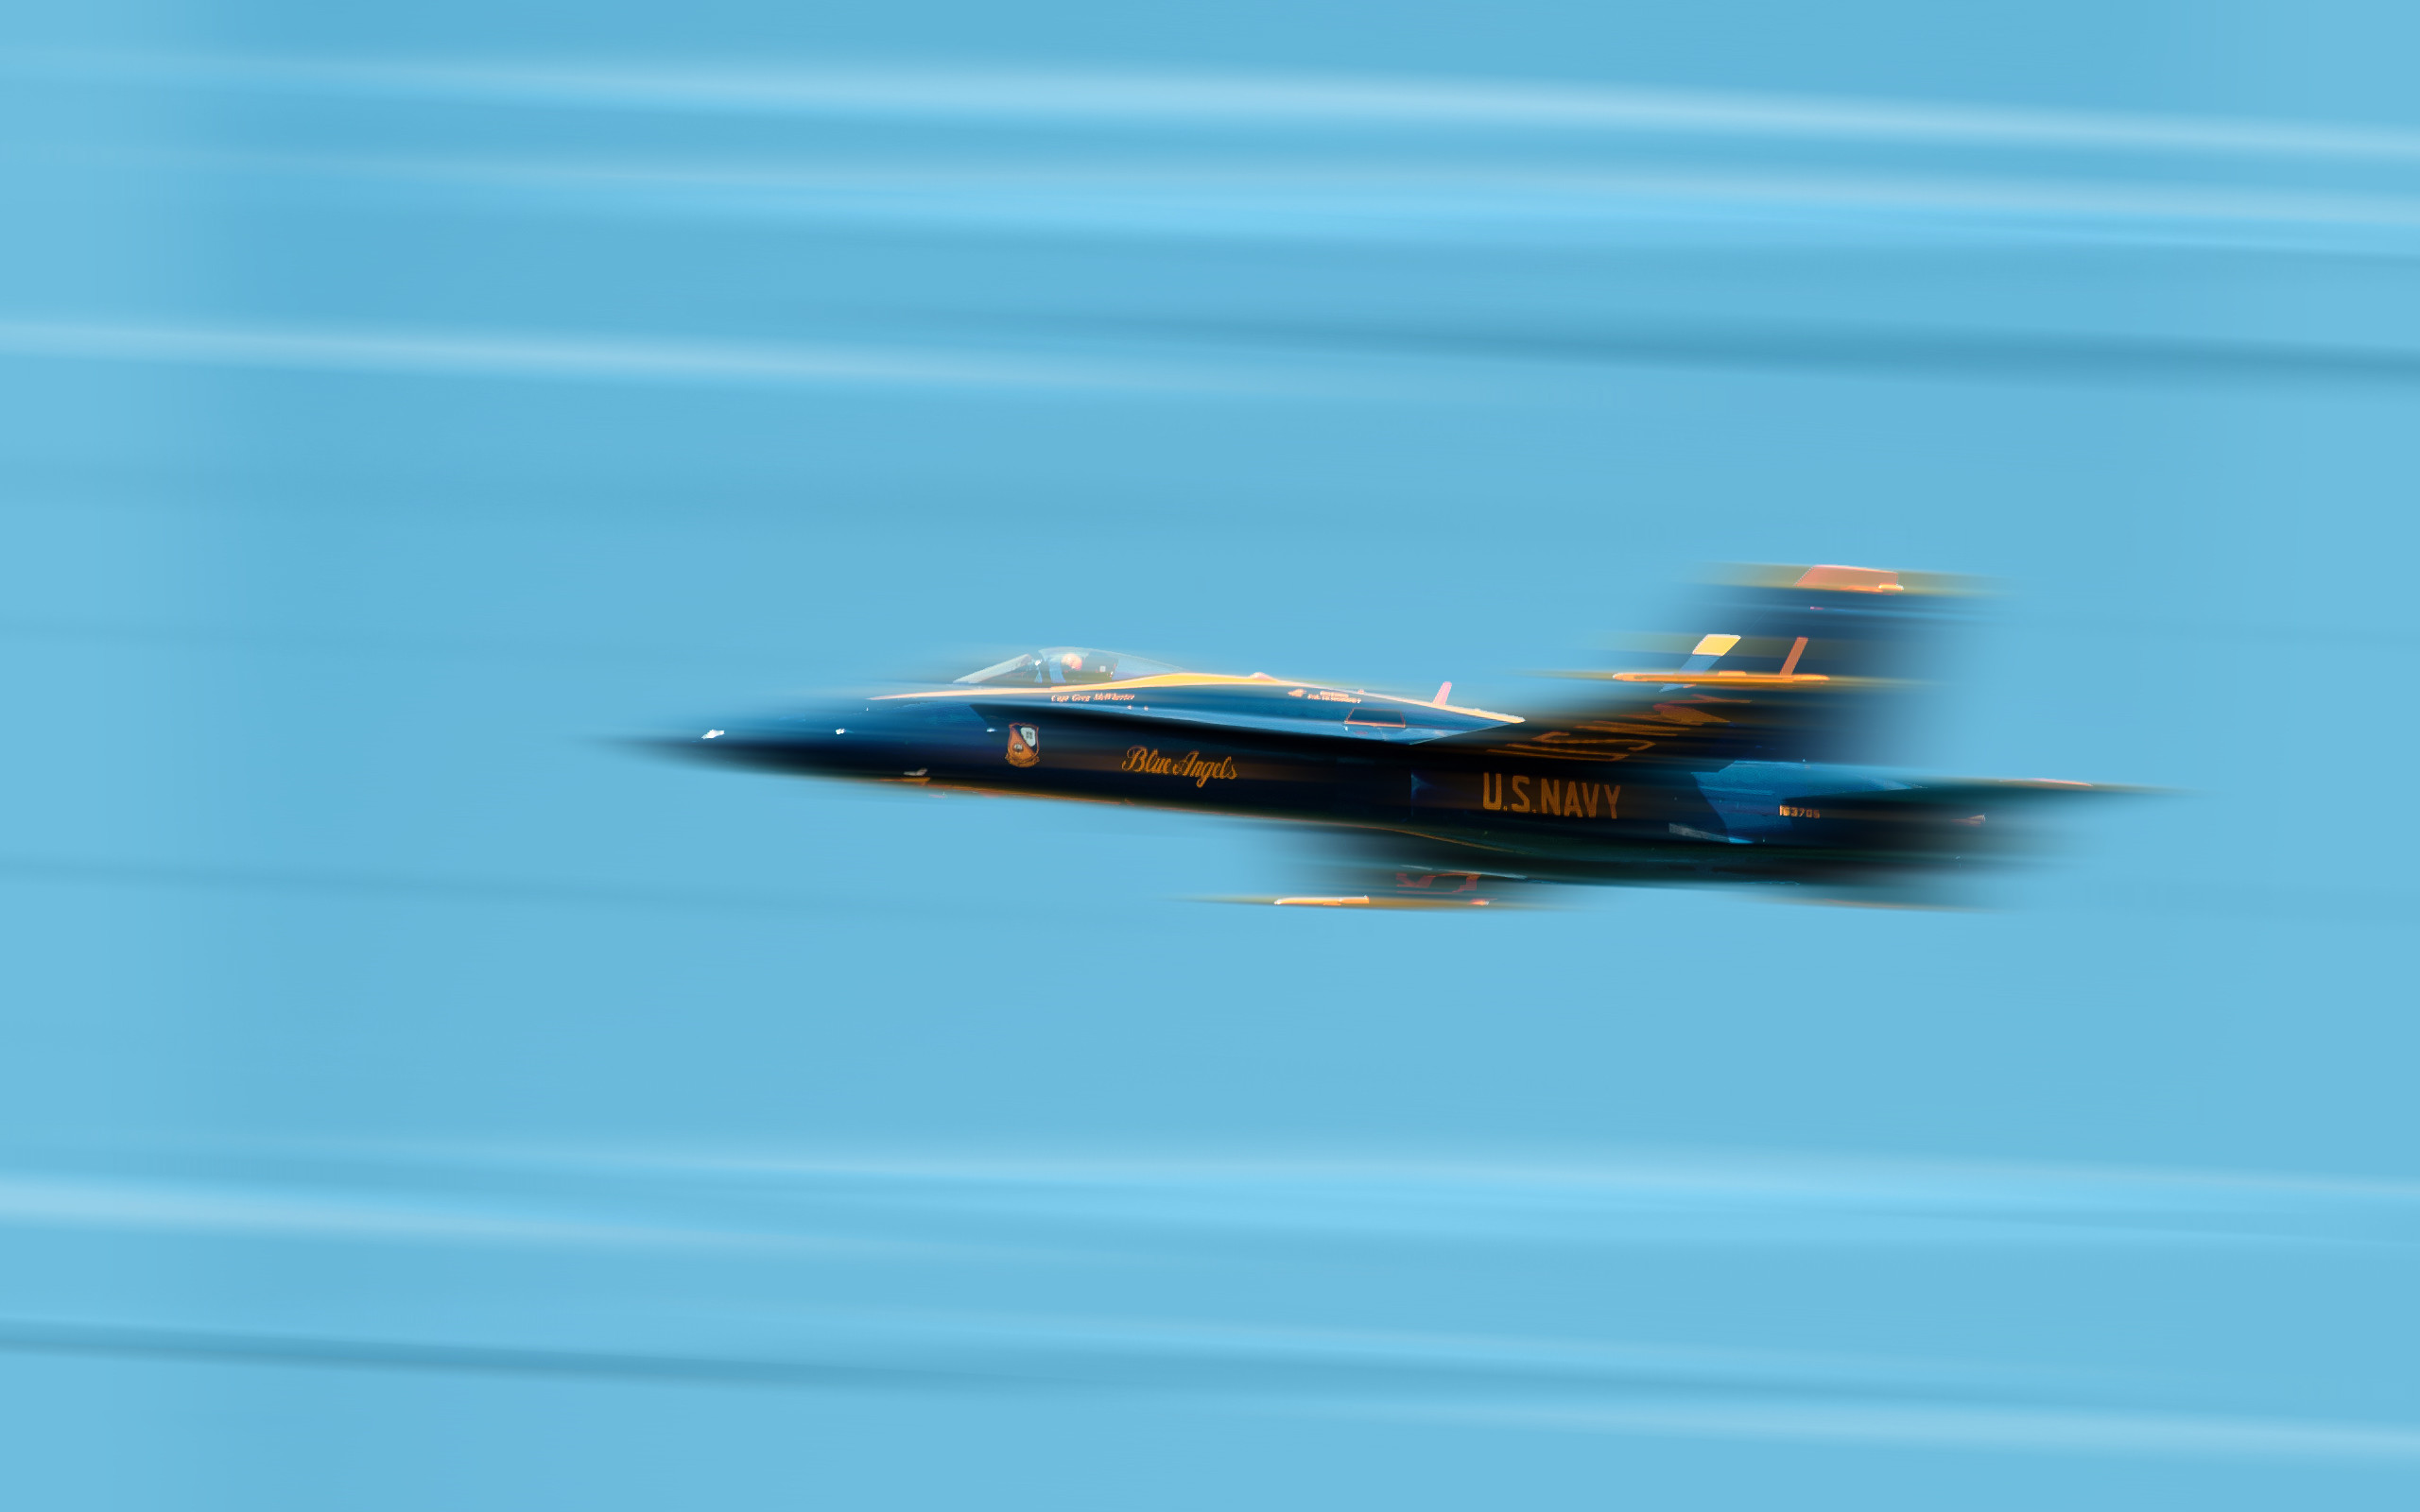 2560x1600 Blue Angel Lead wallpapers and stock photos